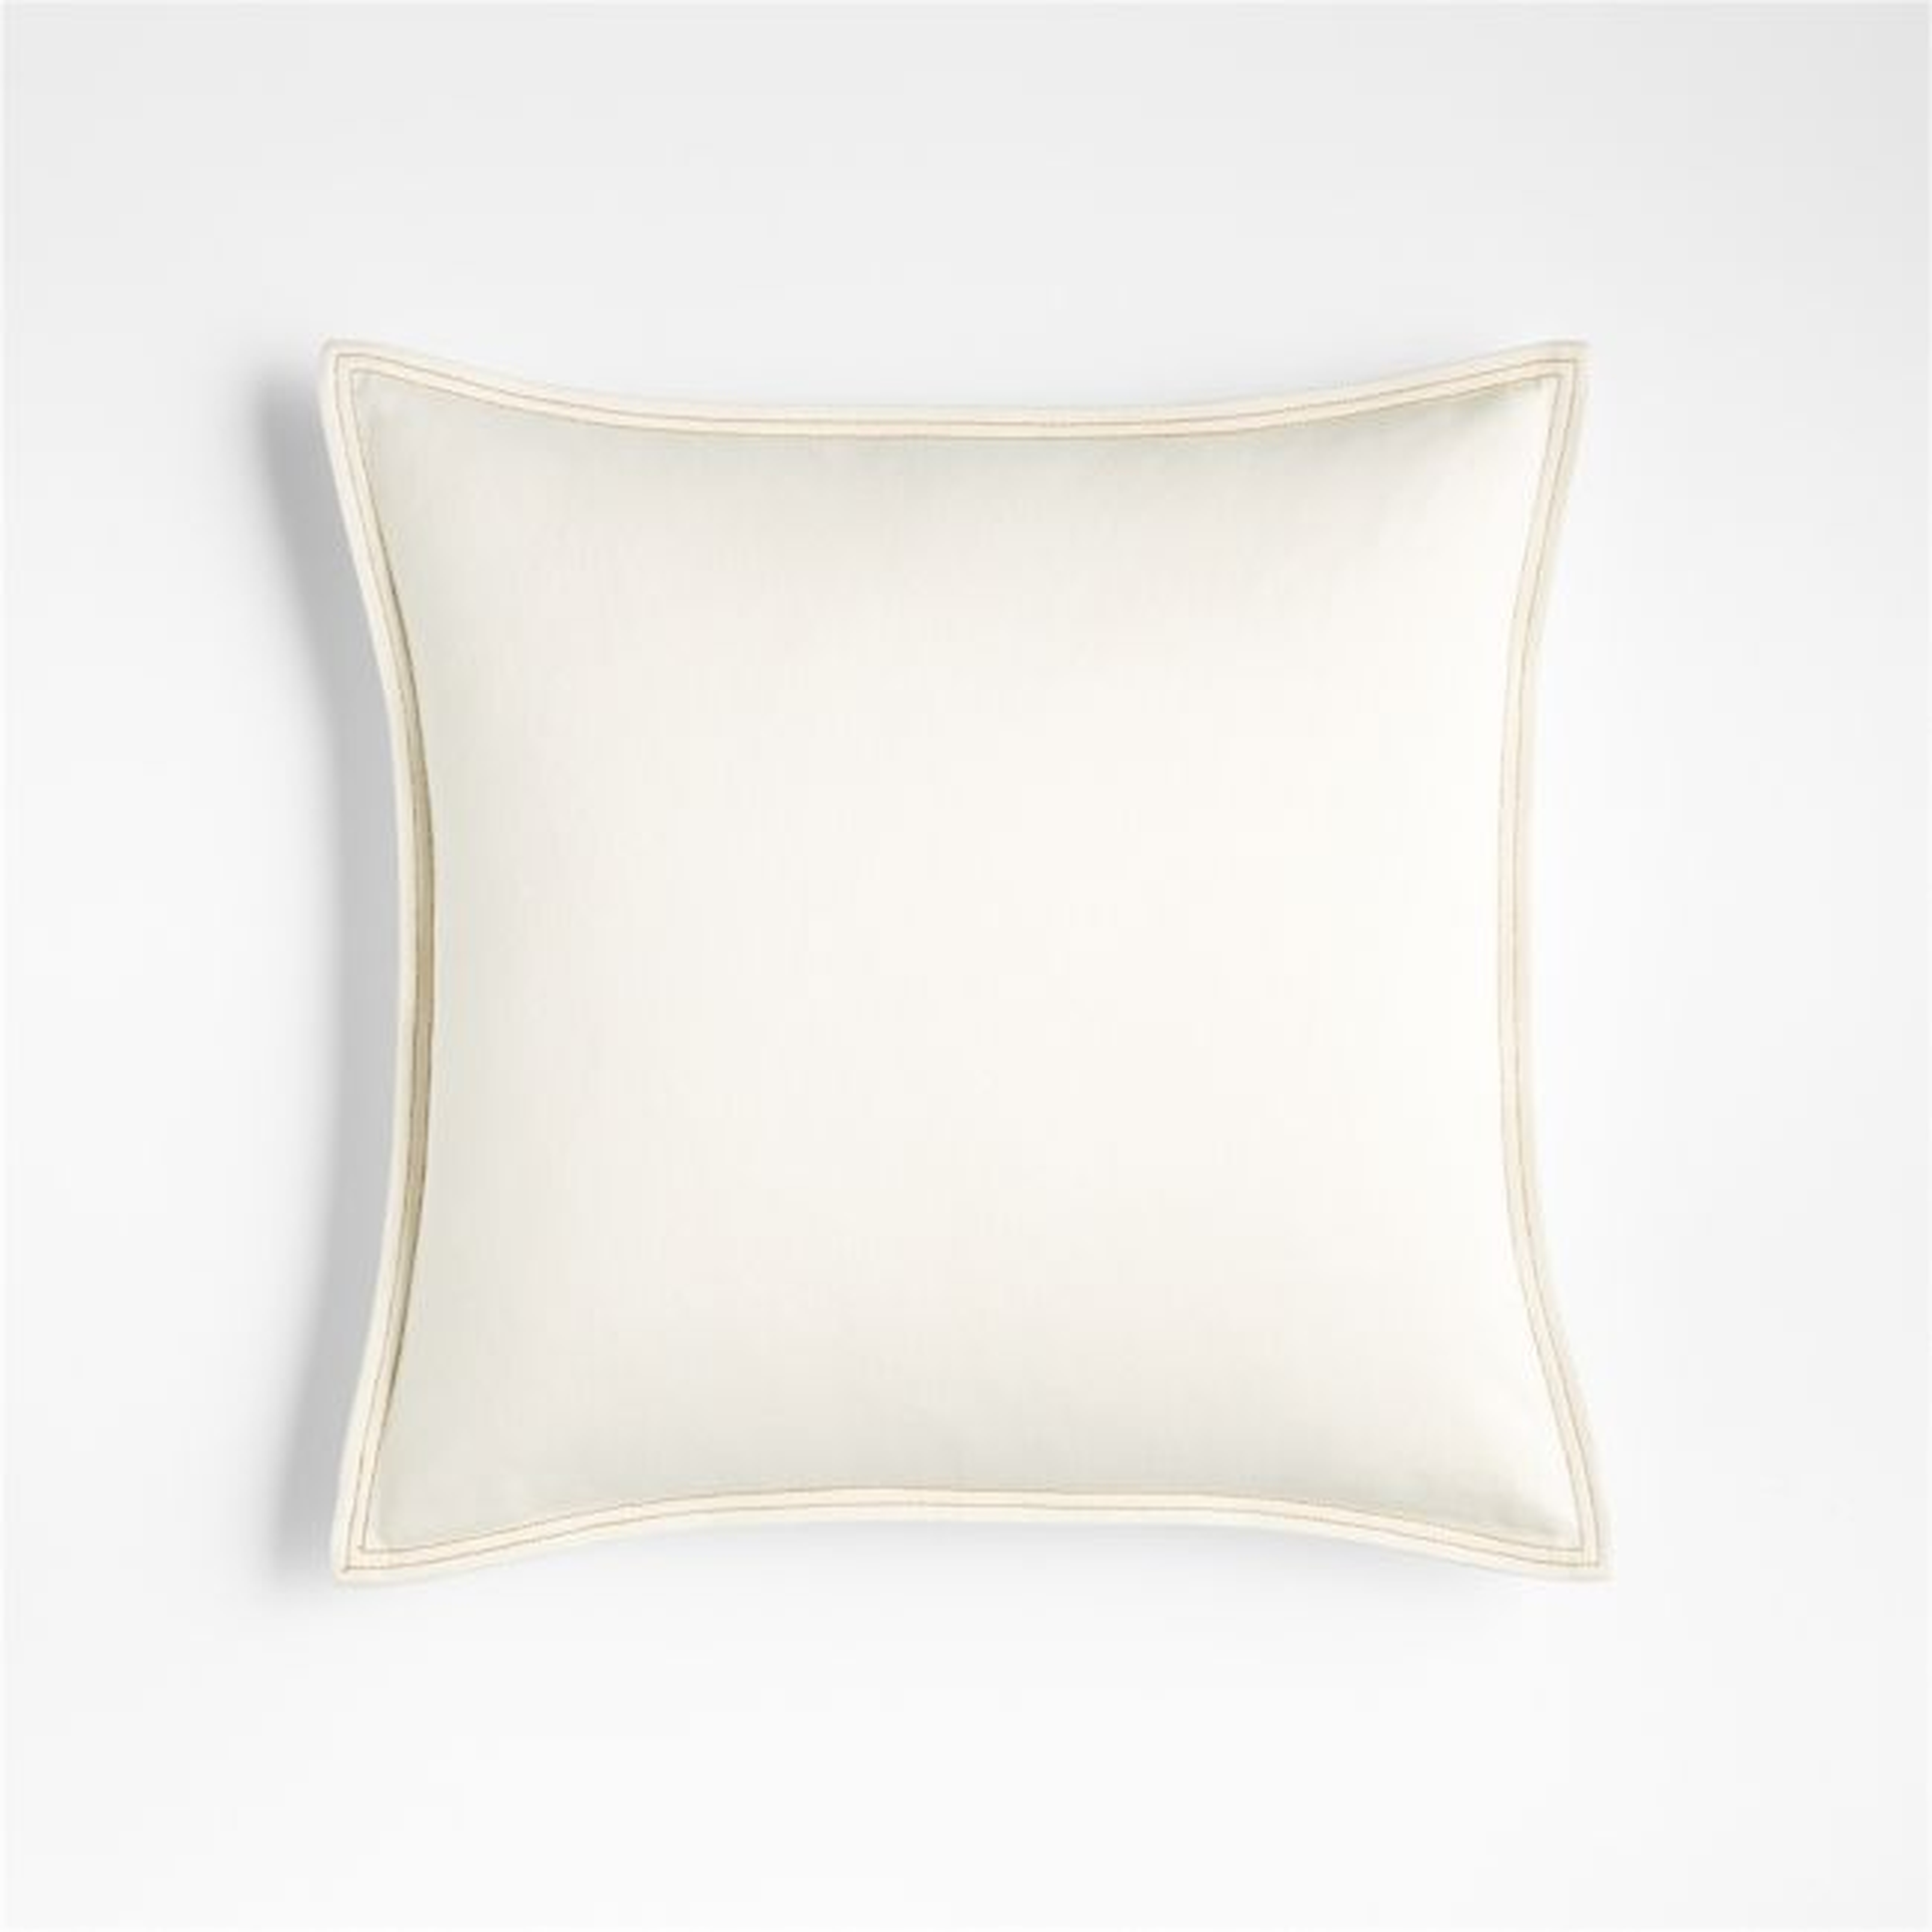 Blanca Pillow Cover, 18" x 18", Denim White - Crate and Barrel